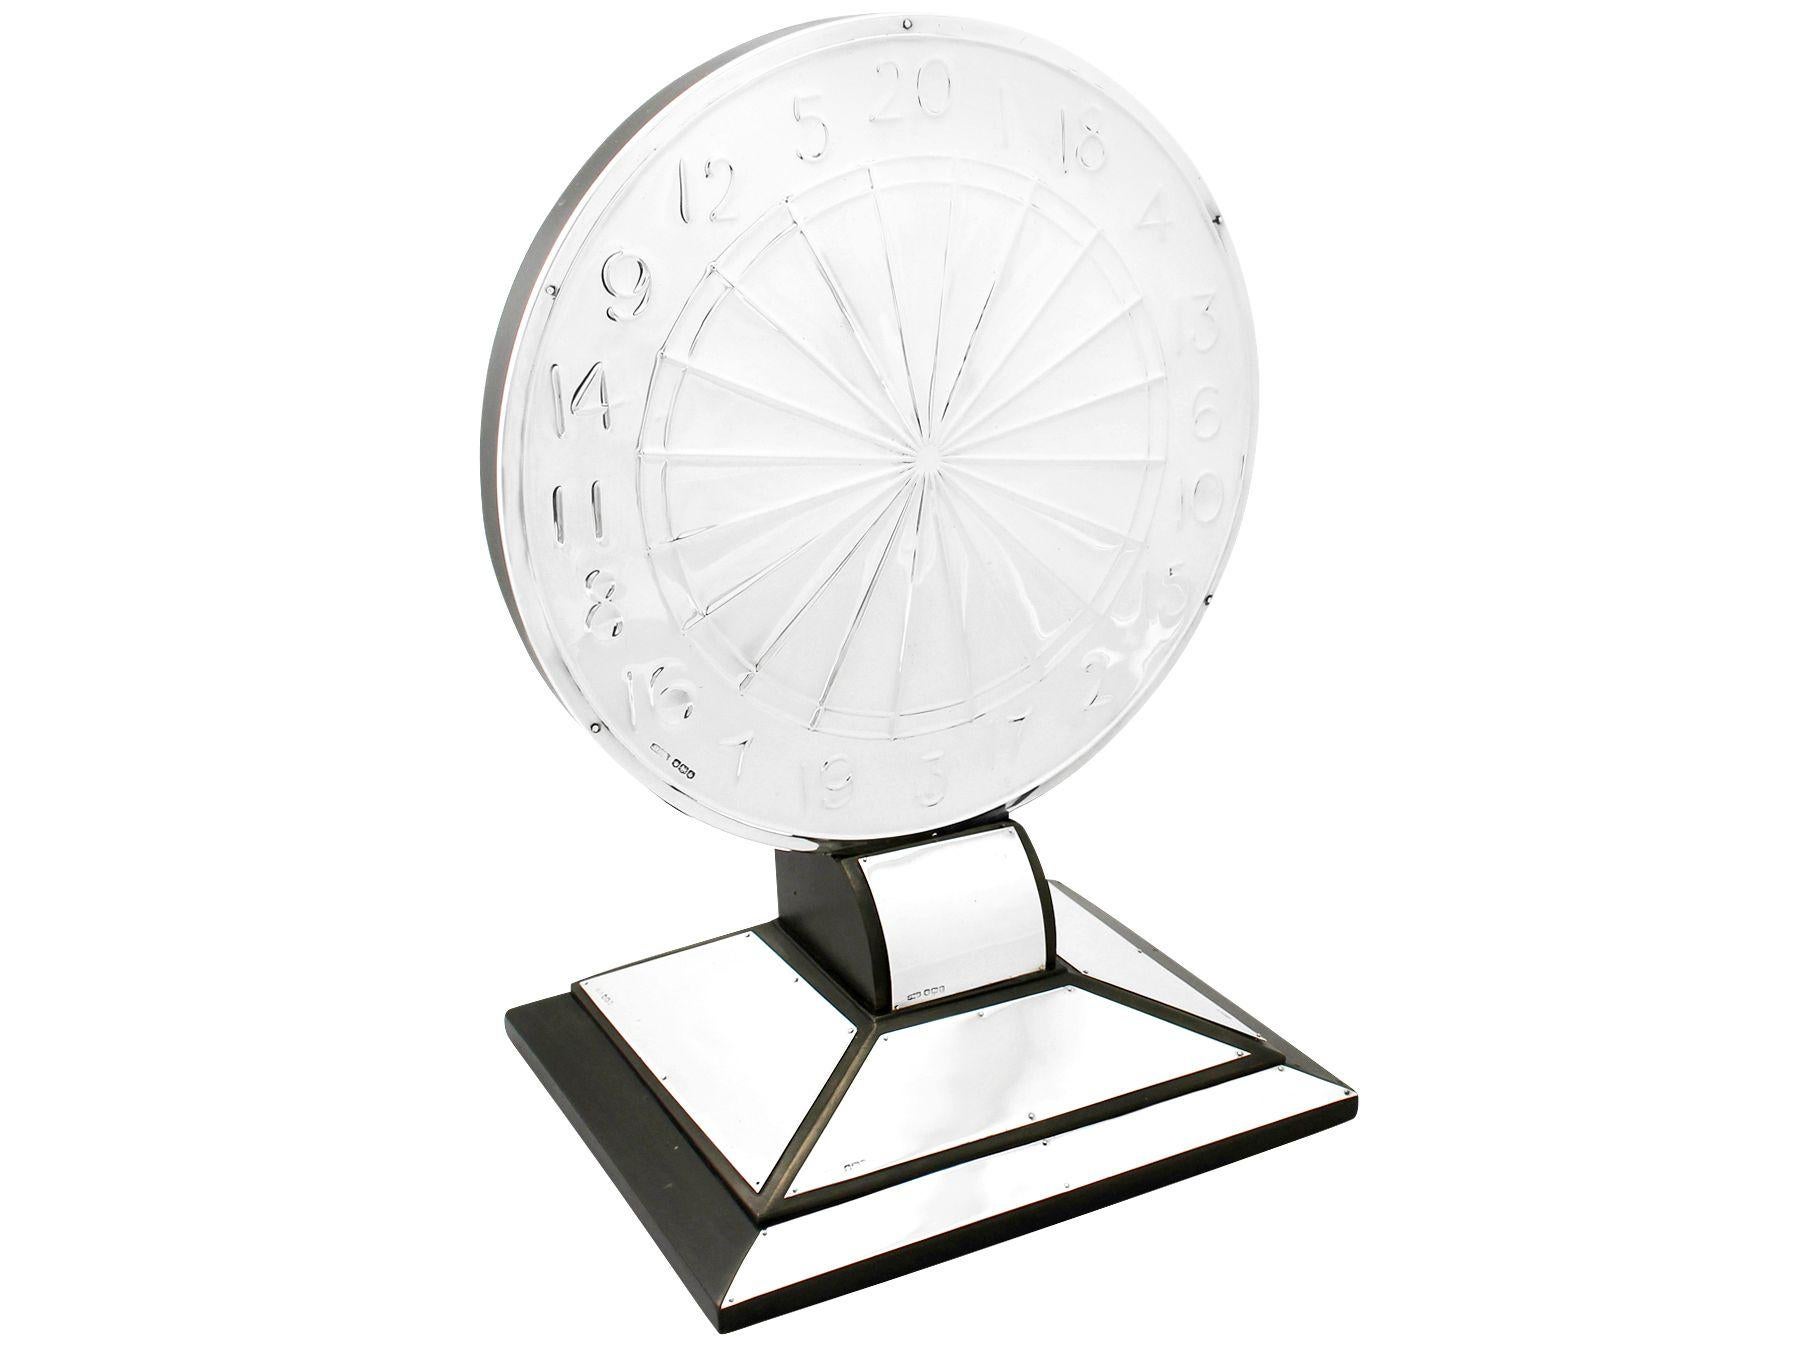 An exceptional, fine and impressive, unusual antique George V English sterling silver Art Deco presentation trophy in the form of dartboard; part of our silverware collection.

This exceptional and unusual antique sterling silver trophy has been